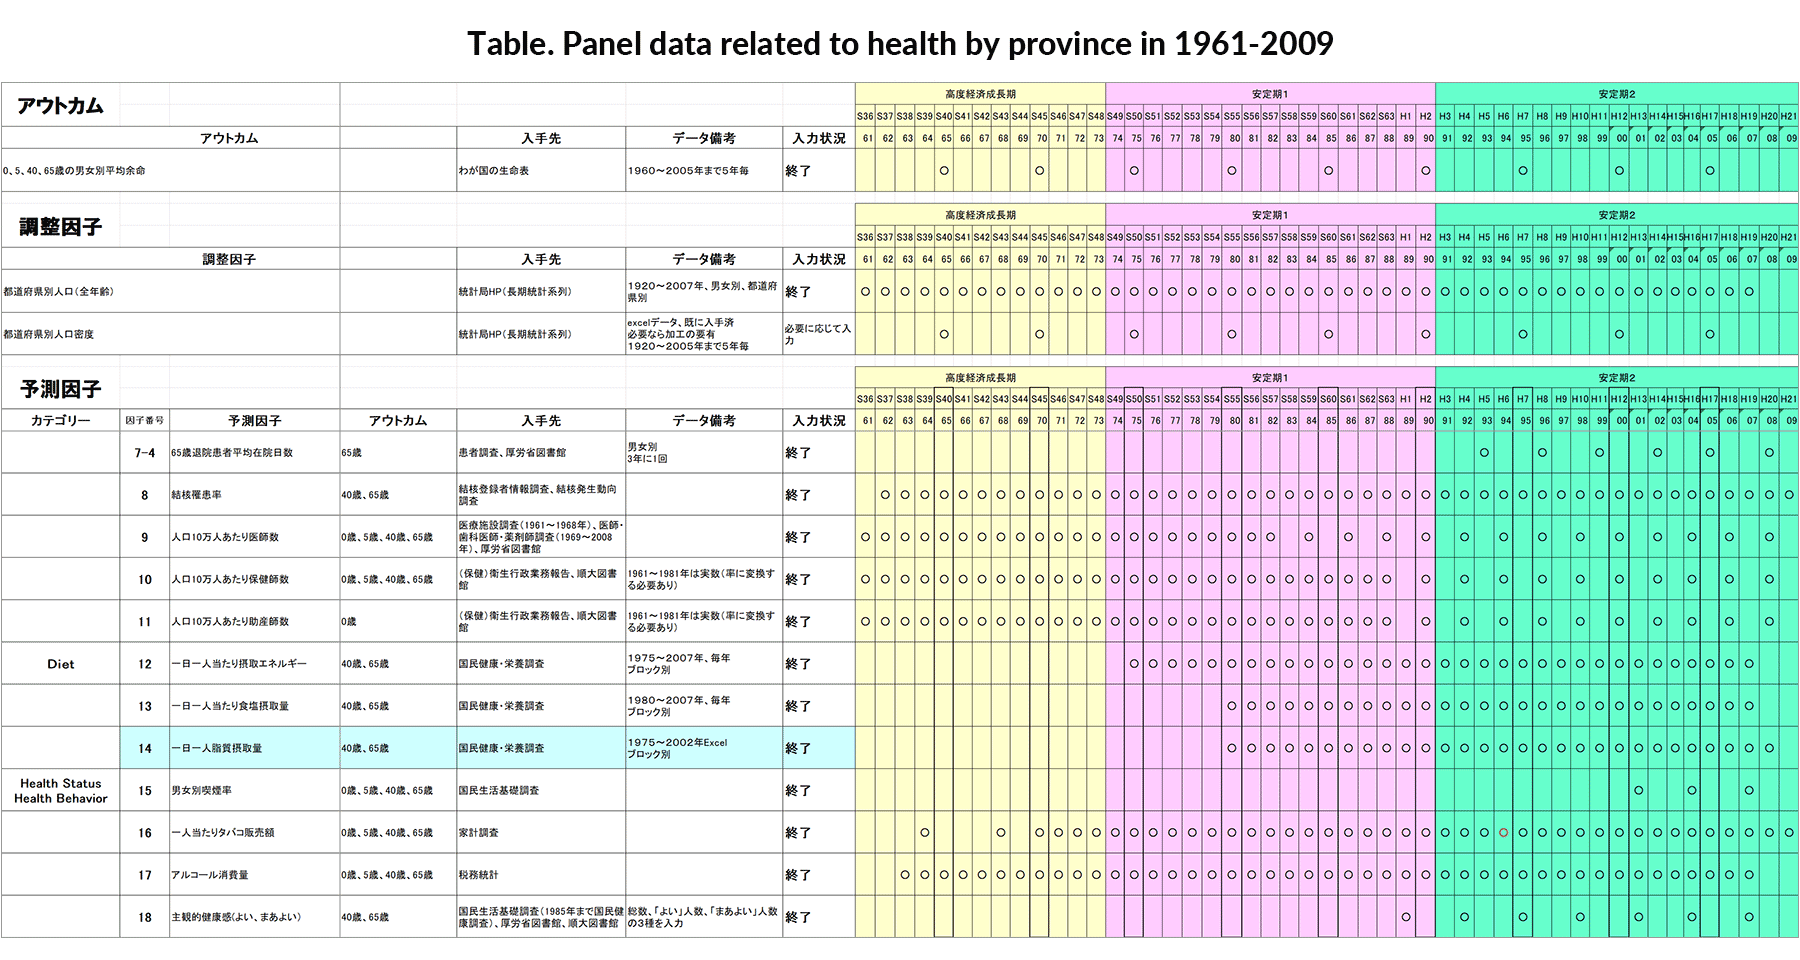 Table. Panel data related to health by province in 1961-2009